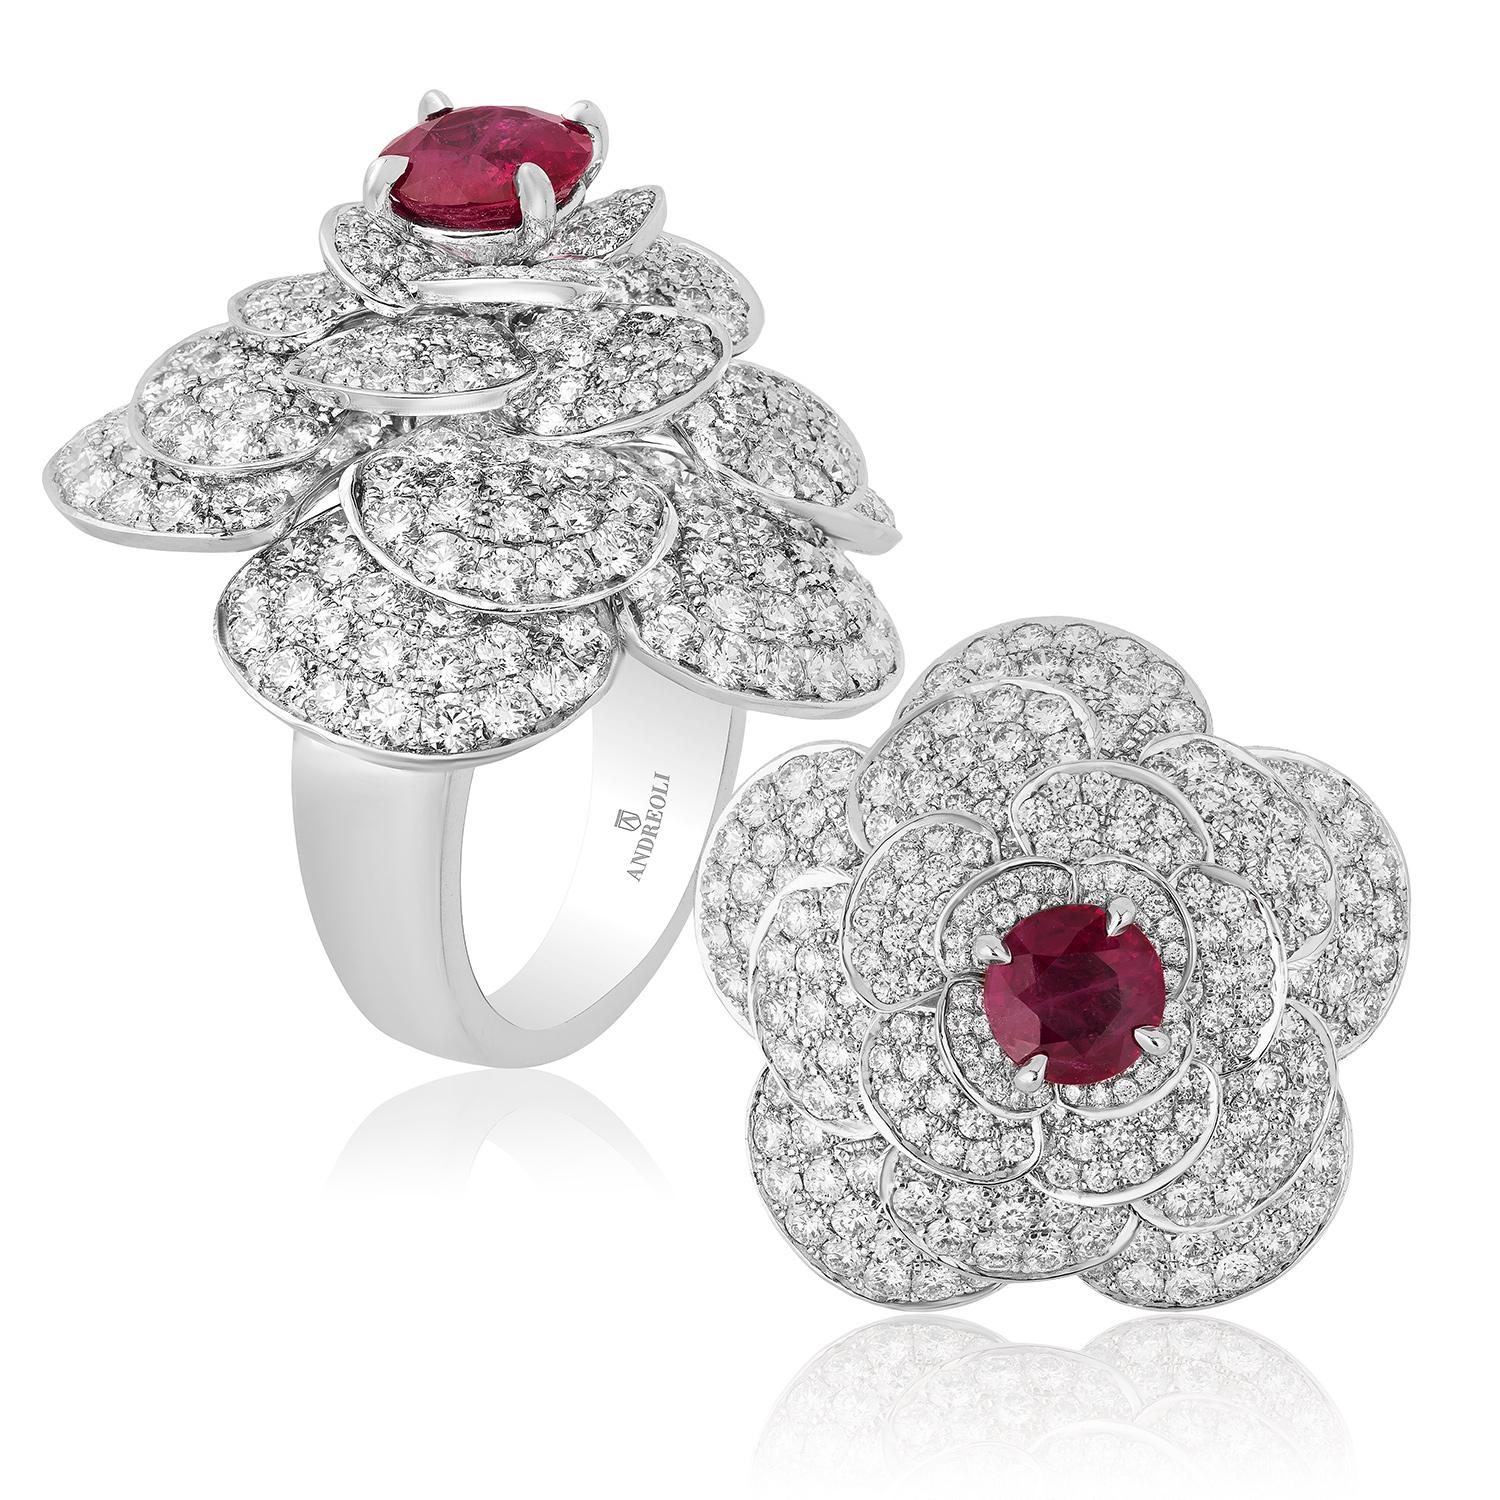 Round Cut Andreoli 1.68 Carat Ruby Diamond 18 Karat White Gold Flower Ring CDC Certified For Sale